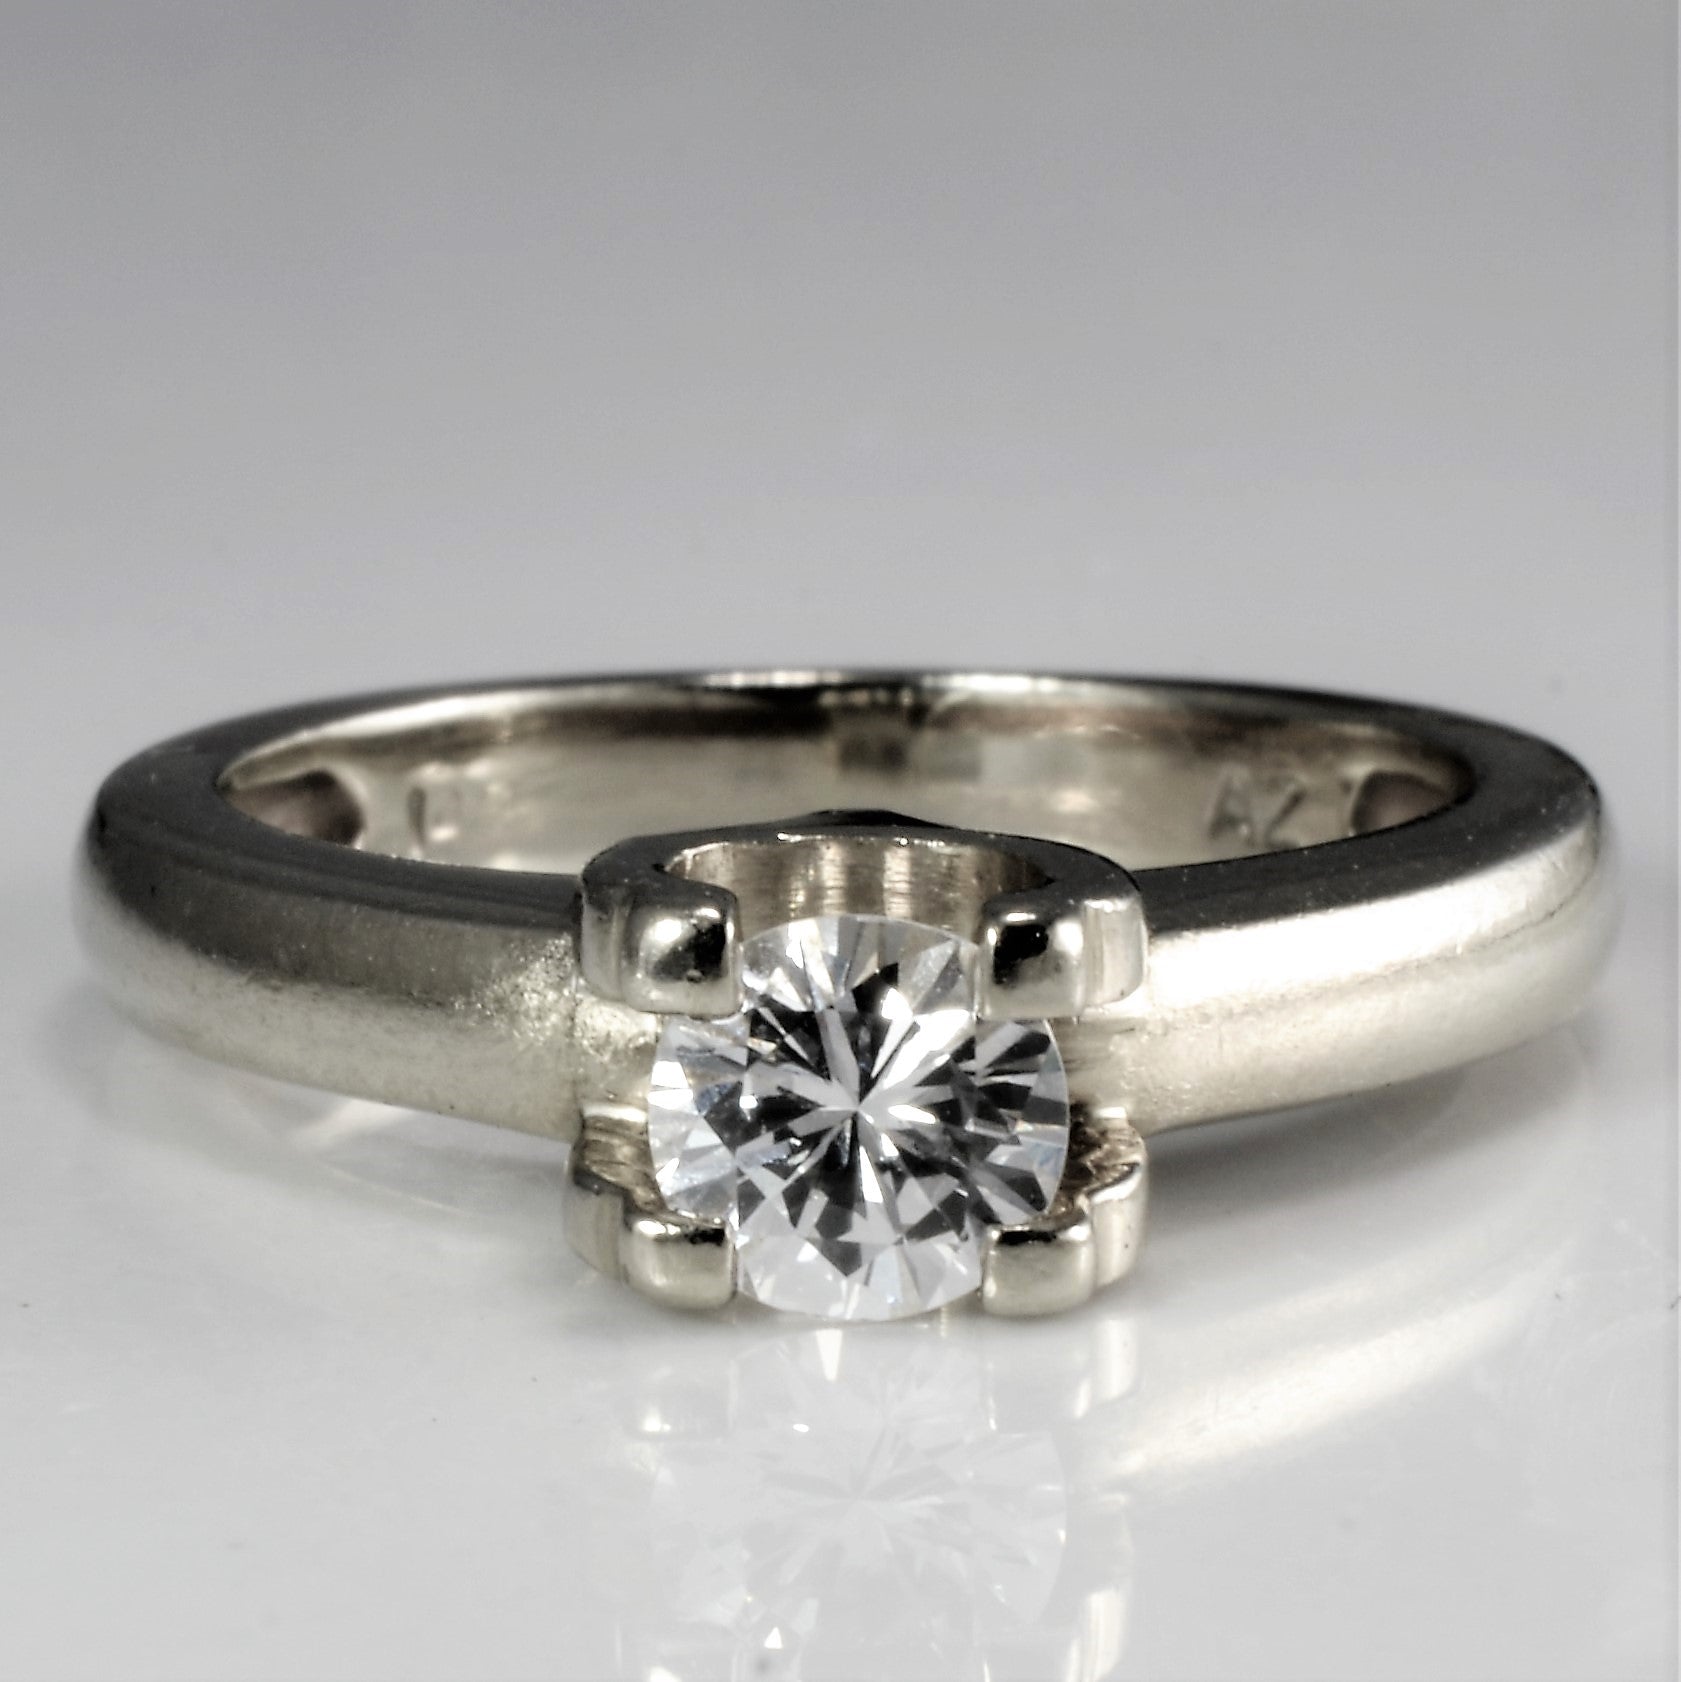 Claw Set Solitaire Diamond Engagement Ring | 0.46 ct, SZ 5.75 |